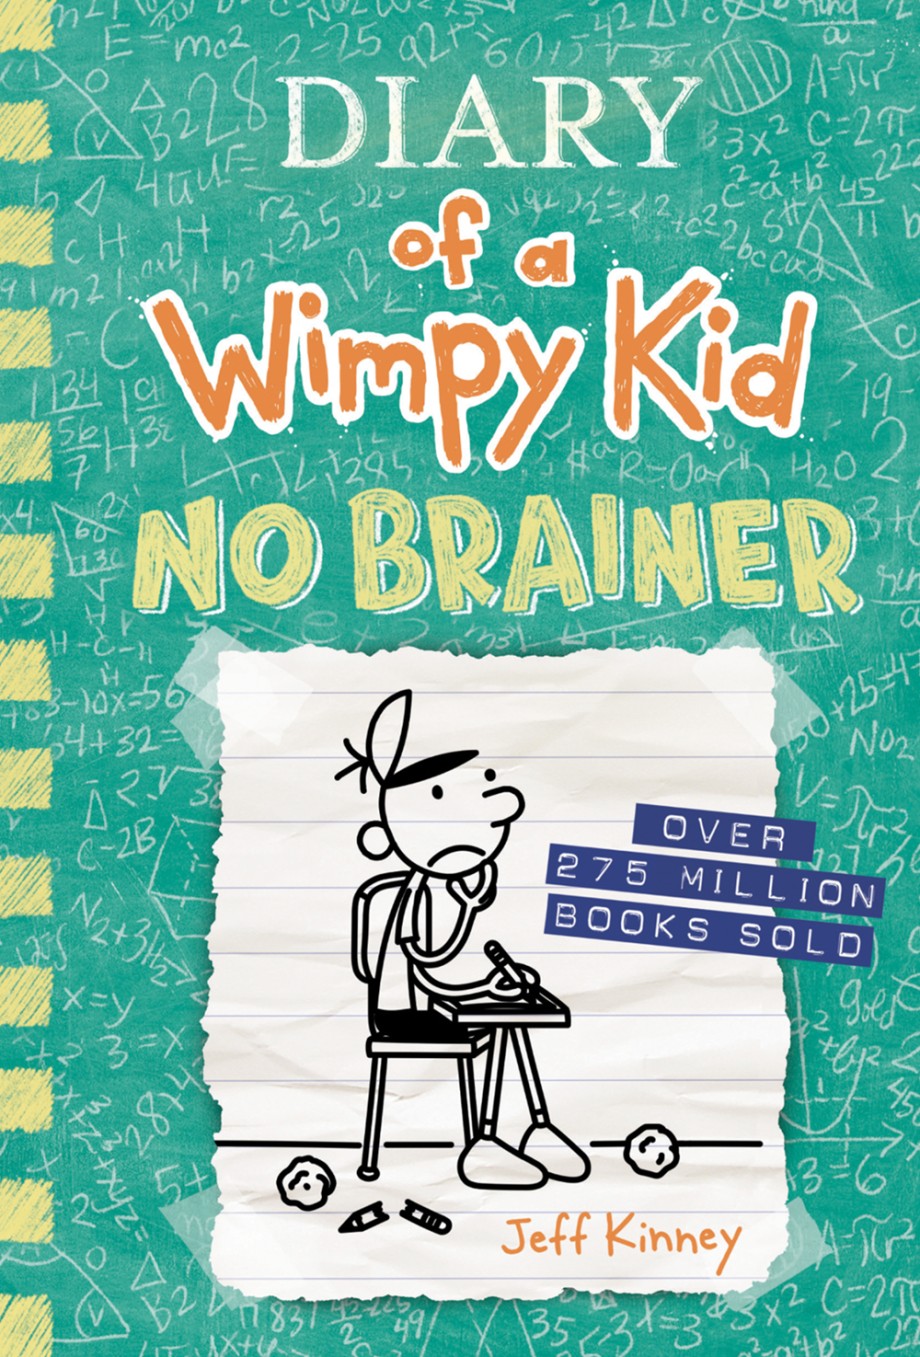 Diary of a Wimpy Kid: Book 18 